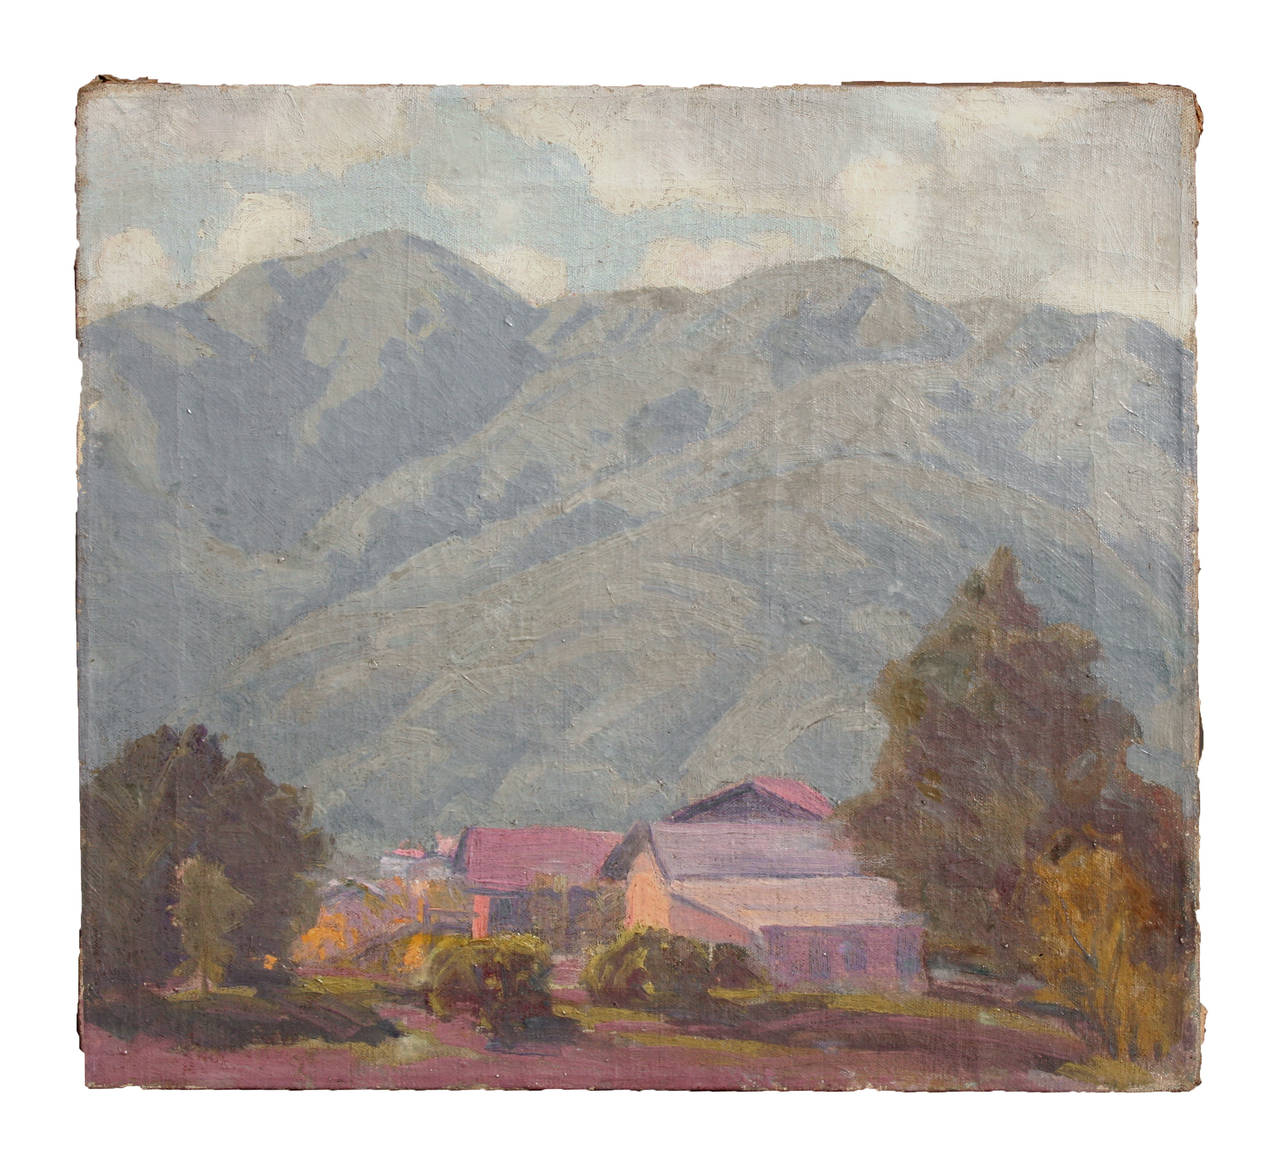 Substantial and period Arroyo Seco School landscape painting of the San Gabriel Mountains in California among billowing clouds and a red-roofed barn attributed to Hanson Puthuff (American 1875-1972), c.1920. Unsigned, Unframed. Image size: 16